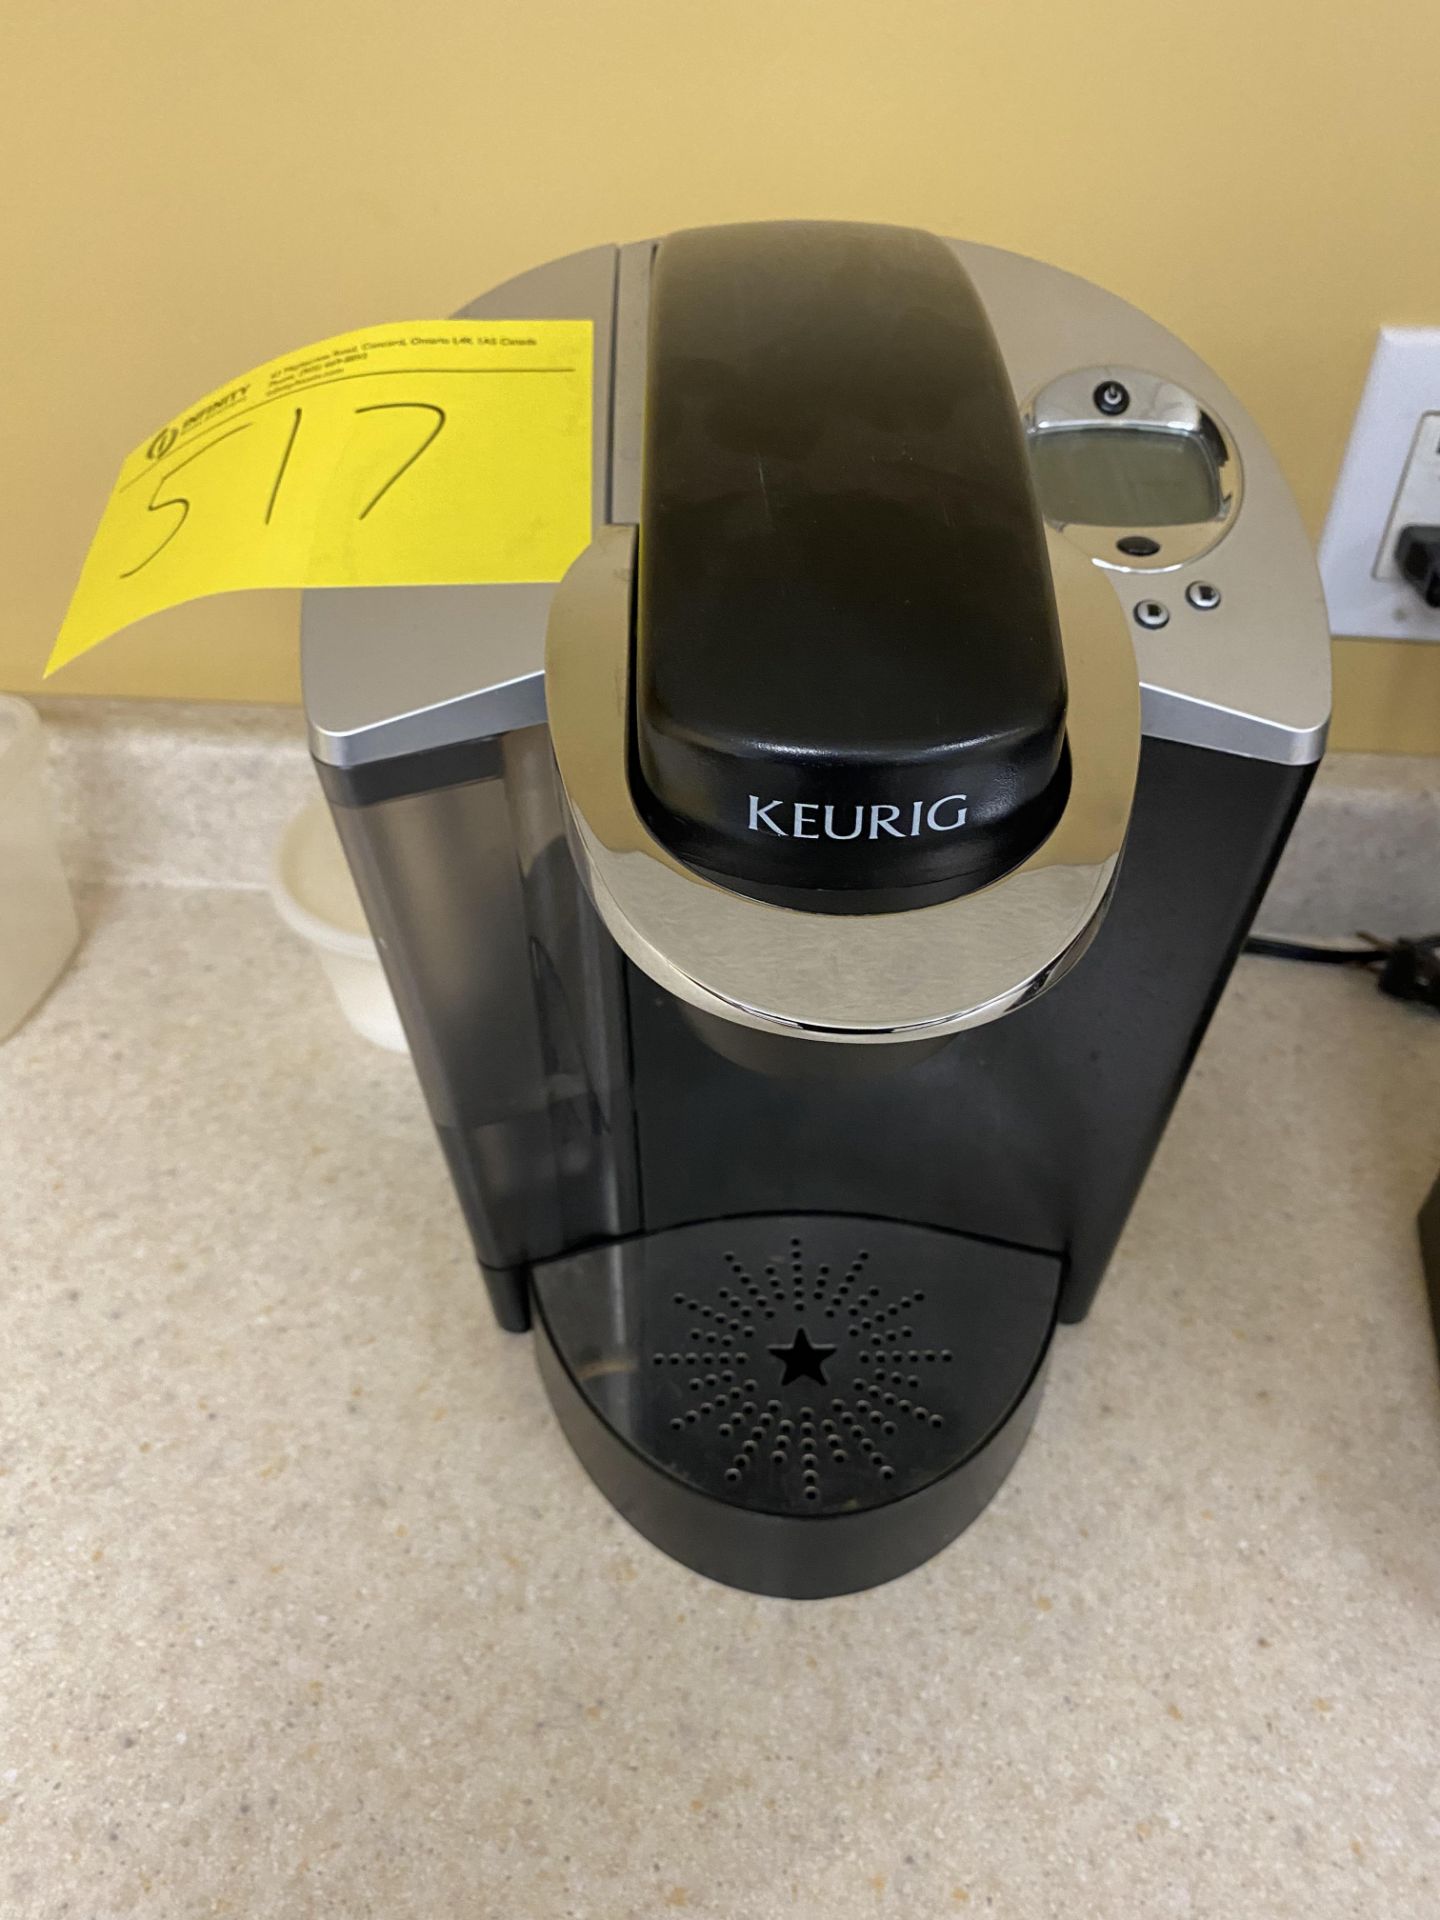 KEURIG, CUISINART COFFEE MAKERS, TOASTER OVEN, SHOP STOOL - Image 2 of 4